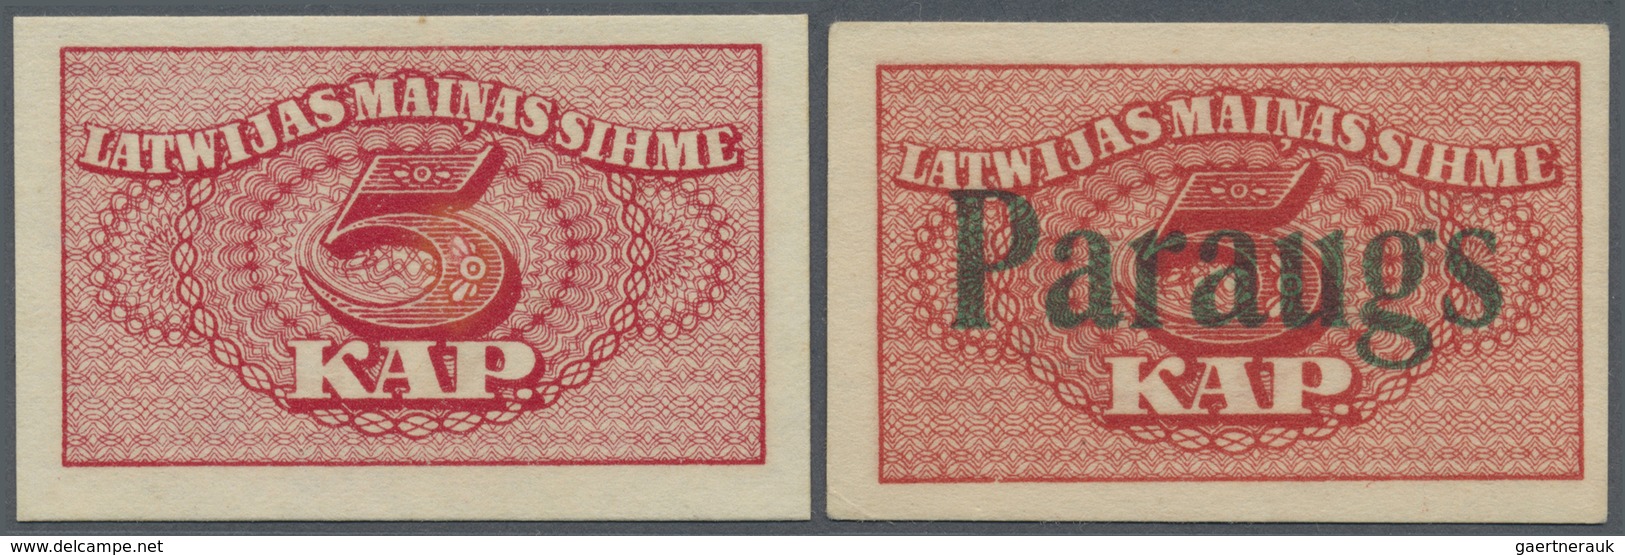 Latvia / Lettland: Set Of 2 Notes 5 Kap. 1920 As SPECIMEN And Regular Issue, P. 9s And P. 9, The Spe - Latvia